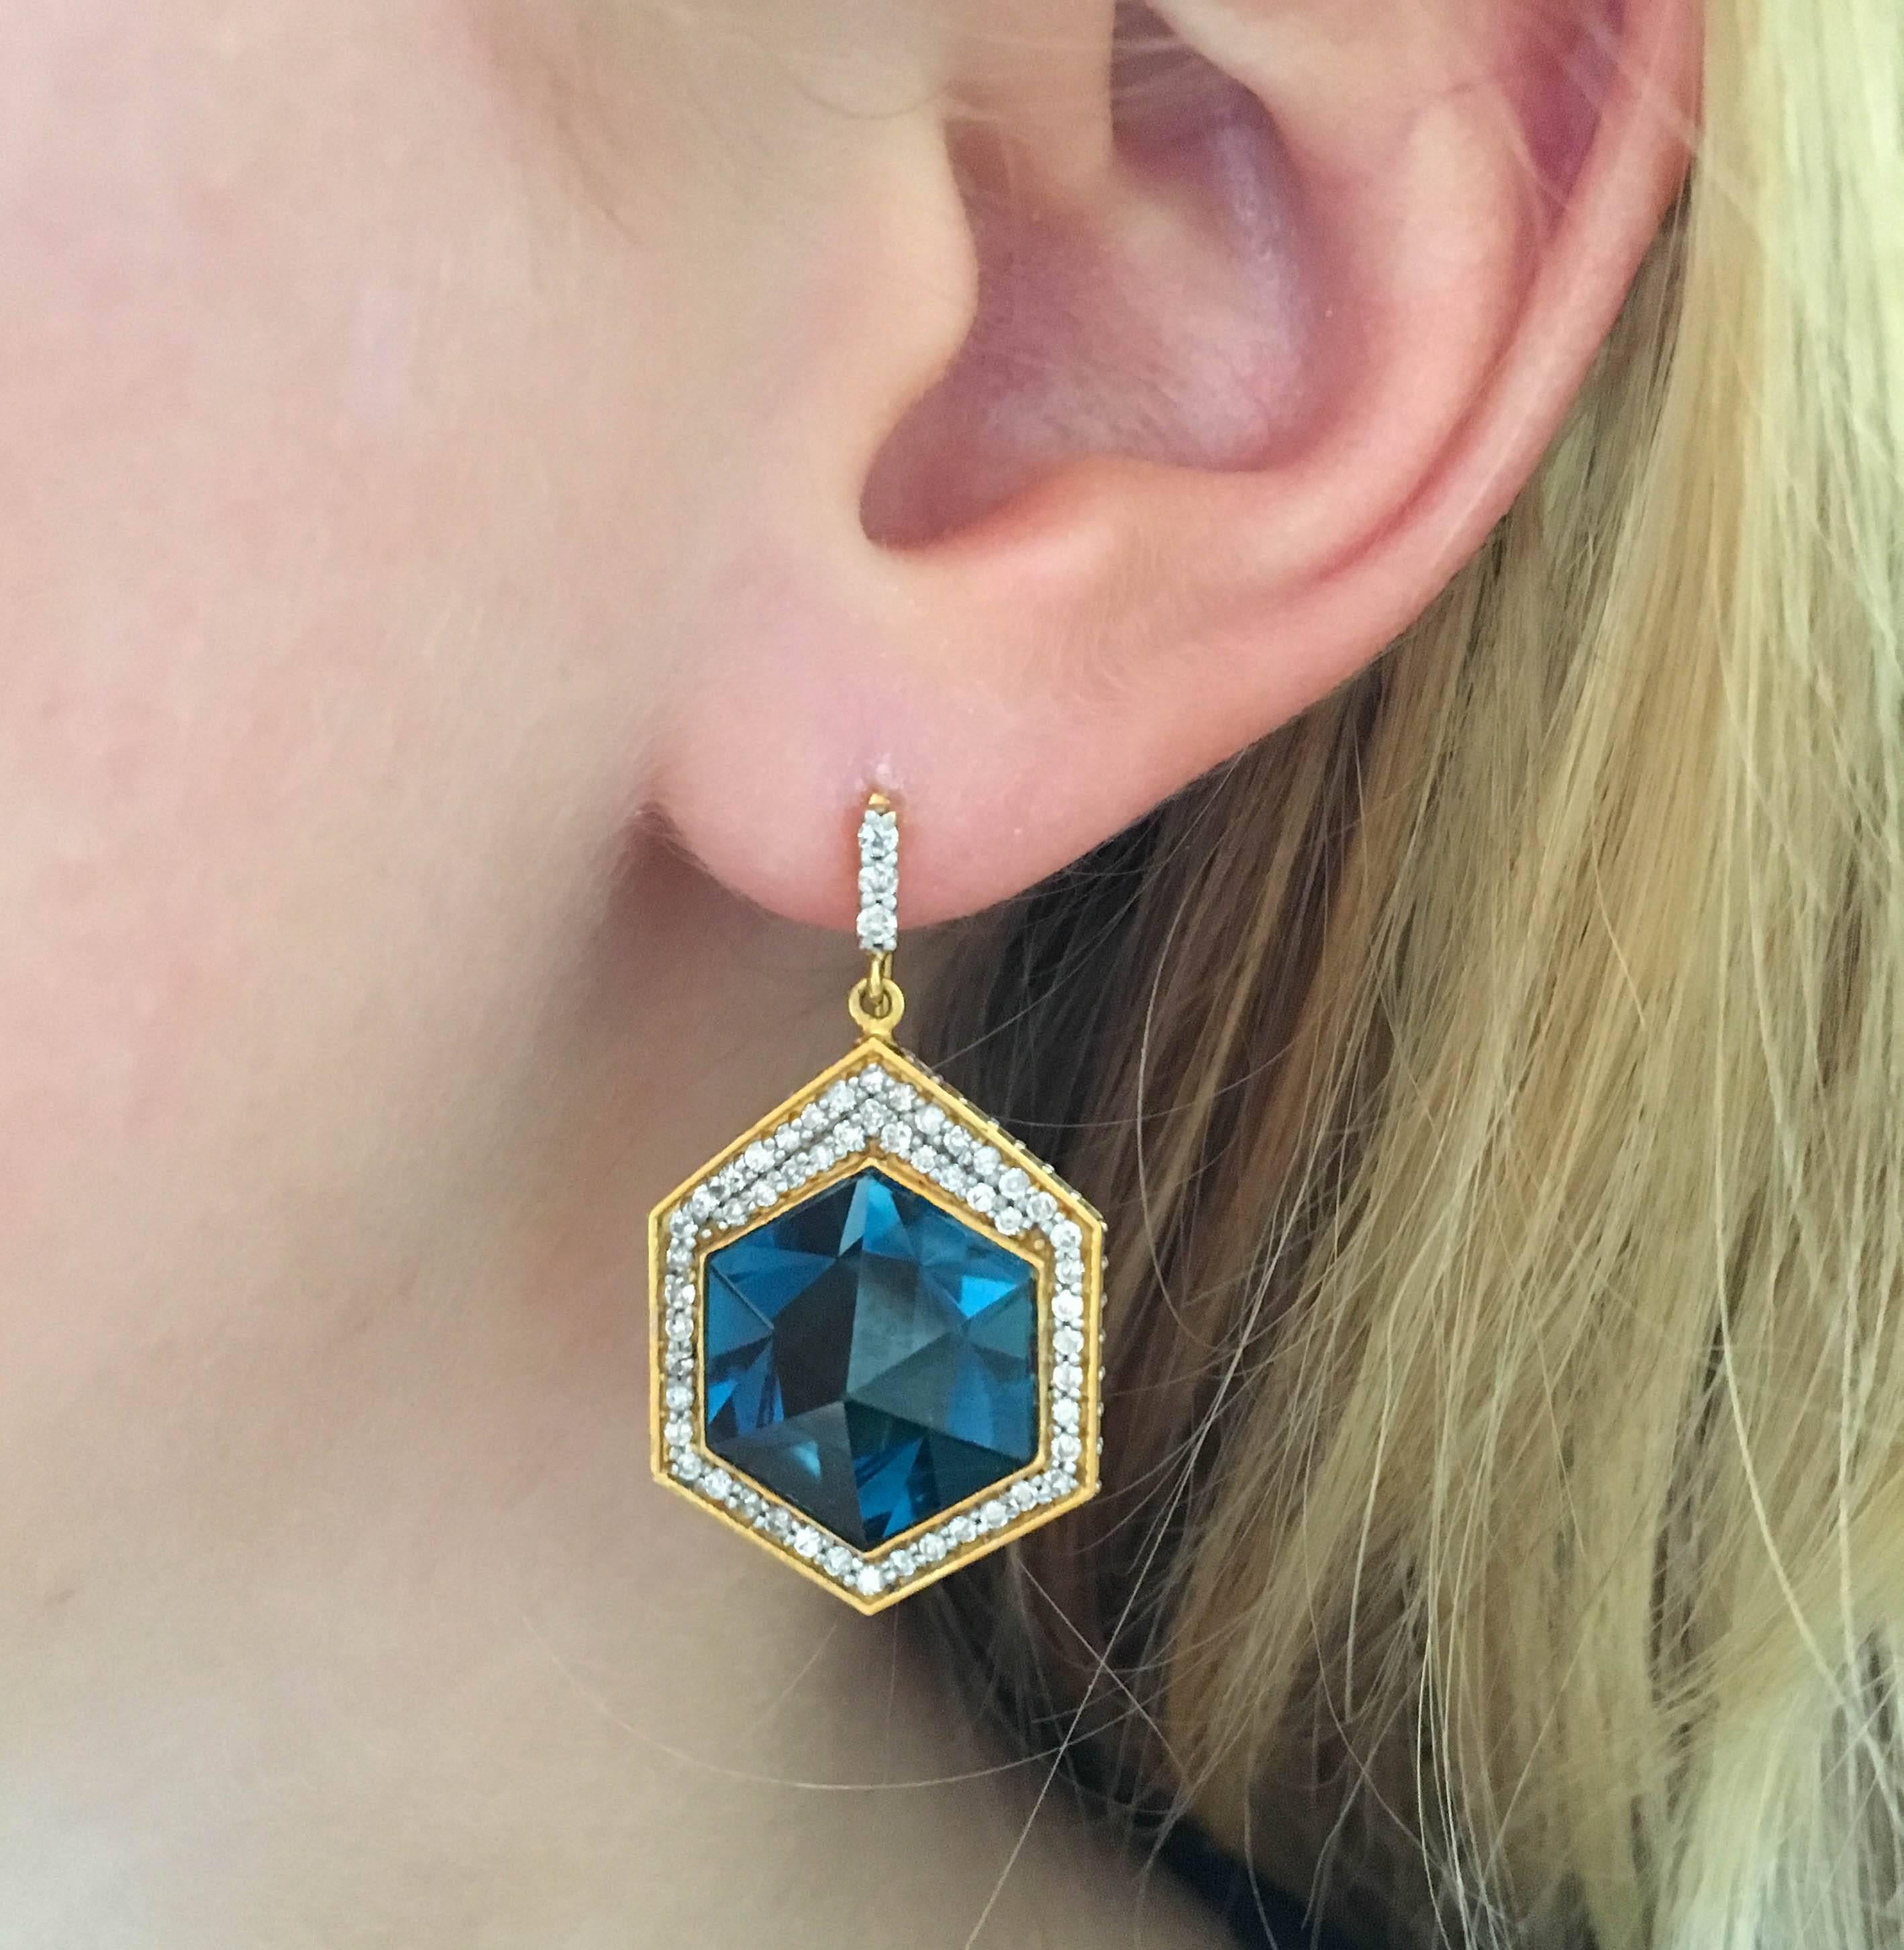 3 Dimensional hexagon pyramids in deep blue London blue topaz, surrounded by 1.41 carats of white Diamonds in 18k Gold.  These earrings are gorgeous from the side as well, and the diamond detailing goes up the ear wire for flattering effect on the